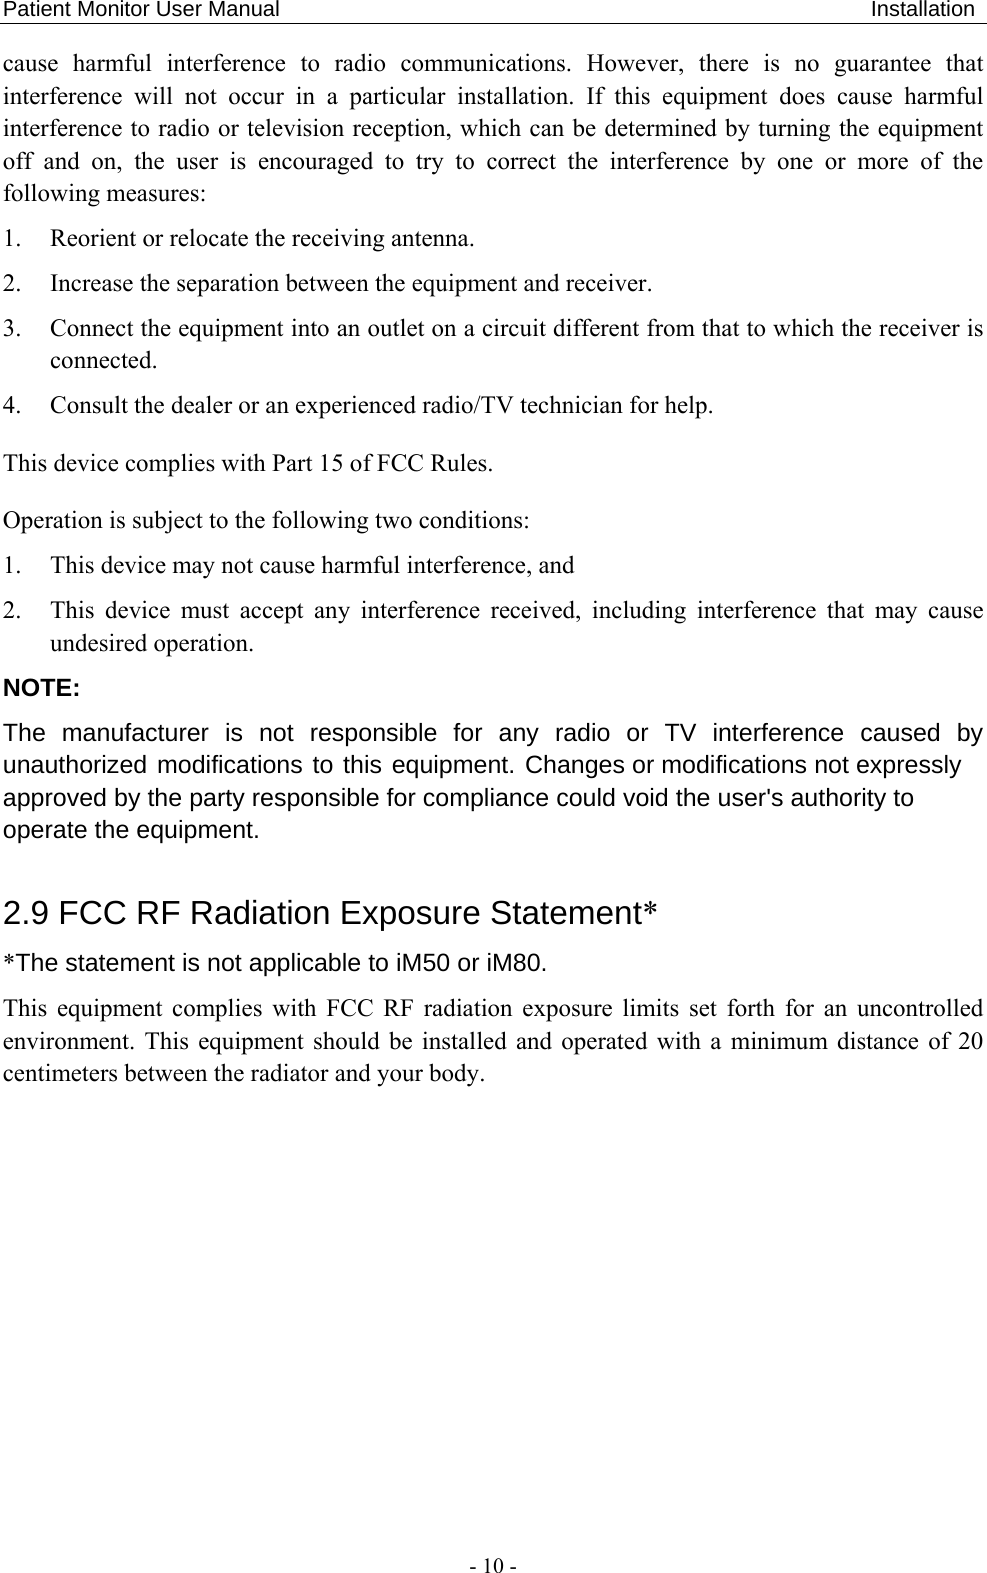 Patient Monitor User Manual                                                      Installation  - 10 - cause harmful interference to radio communications. However, there is no guarantee that interference will not occur in a particular installation. If this equipment does cause harmful interference to radio or television reception, which can be determined by turning the equipment off and on, the user is encouraged to try to correct the interference by one or more of the following measures: 1. Reorient or relocate the receiving antenna.   2. Increase the separation between the equipment and receiver.   3. Connect the equipment into an outlet on a circuit different from that to which the receiver is connected. 4. Consult the dealer or an experienced radio/TV technician for help. This device complies with Part 15 of FCC Rules. Operation is subject to the following two conditions: 1. This device may not cause harmful interference, and 2. This device must accept any interference received, including interference that may cause undesired operation. NOTE: The manufacturer is not responsible for any radio or TV interference caused by unauthorized modifications to this equipment. Changes or modifications not expressly approved by the party responsible for compliance could void the user&apos;s authority to operate the equipment. 2.9 FCC RF Radiation Exposure Statement* *The statement is not applicable to iM50 or iM80. This equipment complies with FCC RF radiation exposure limits set forth for an uncontrolled environment. This equipment should be installed and operated with a minimum distance of 20 centimeters between the radiator and your body.   